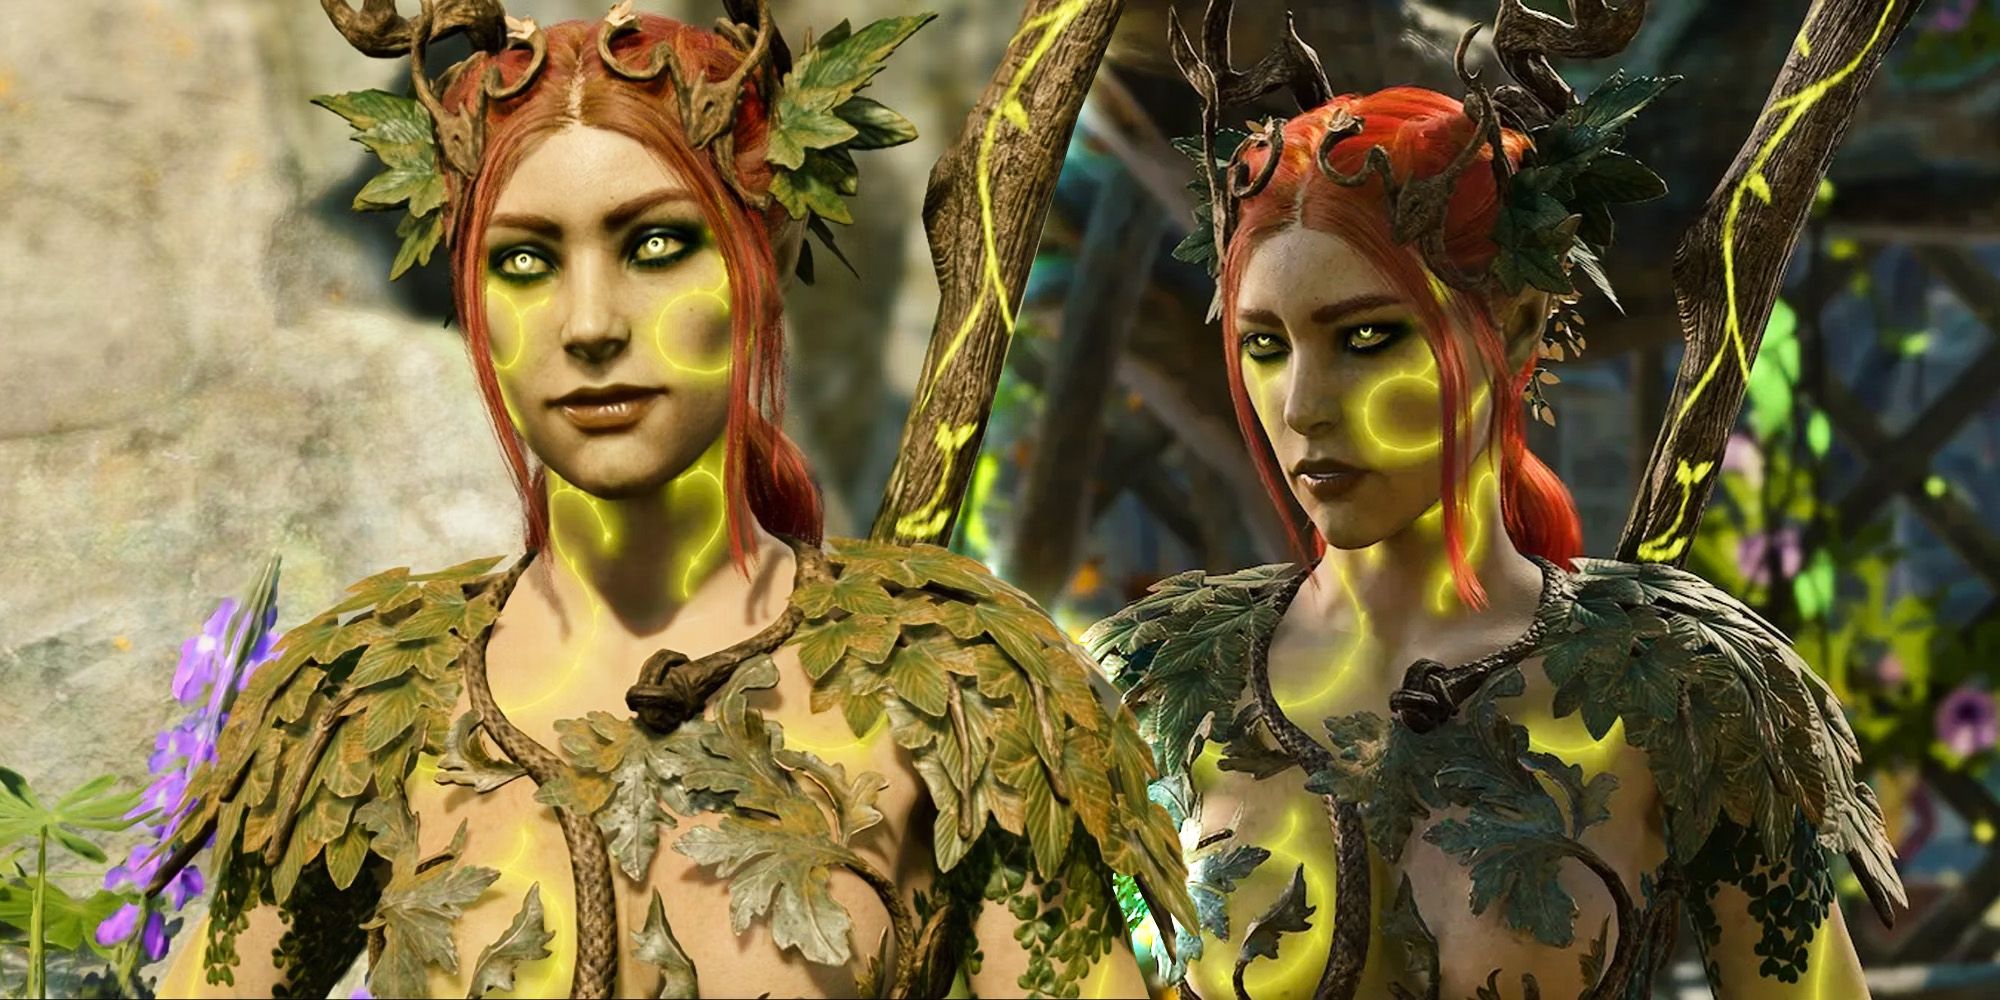 Two renders of Zethino, a dryad with ginger hair covers in ivy leaves. One is of her by the magic waterfall where the love test occurs, and the other is her in the circus.